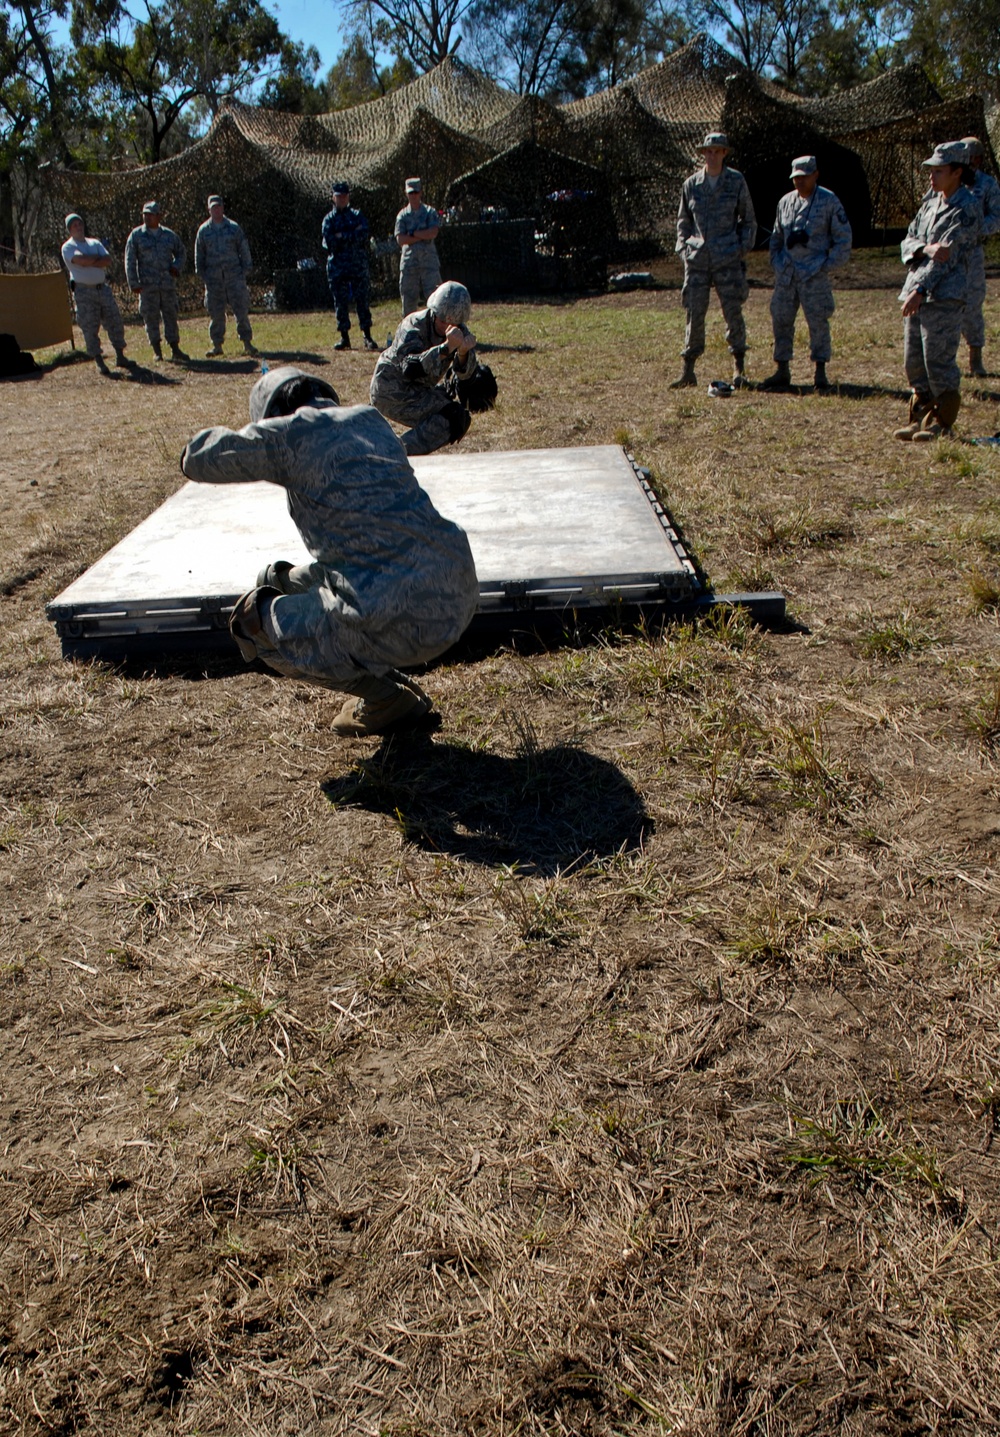 US Air Force 36th Expeditionary Contingency Response Squadron train during Talisman Sabre 2011